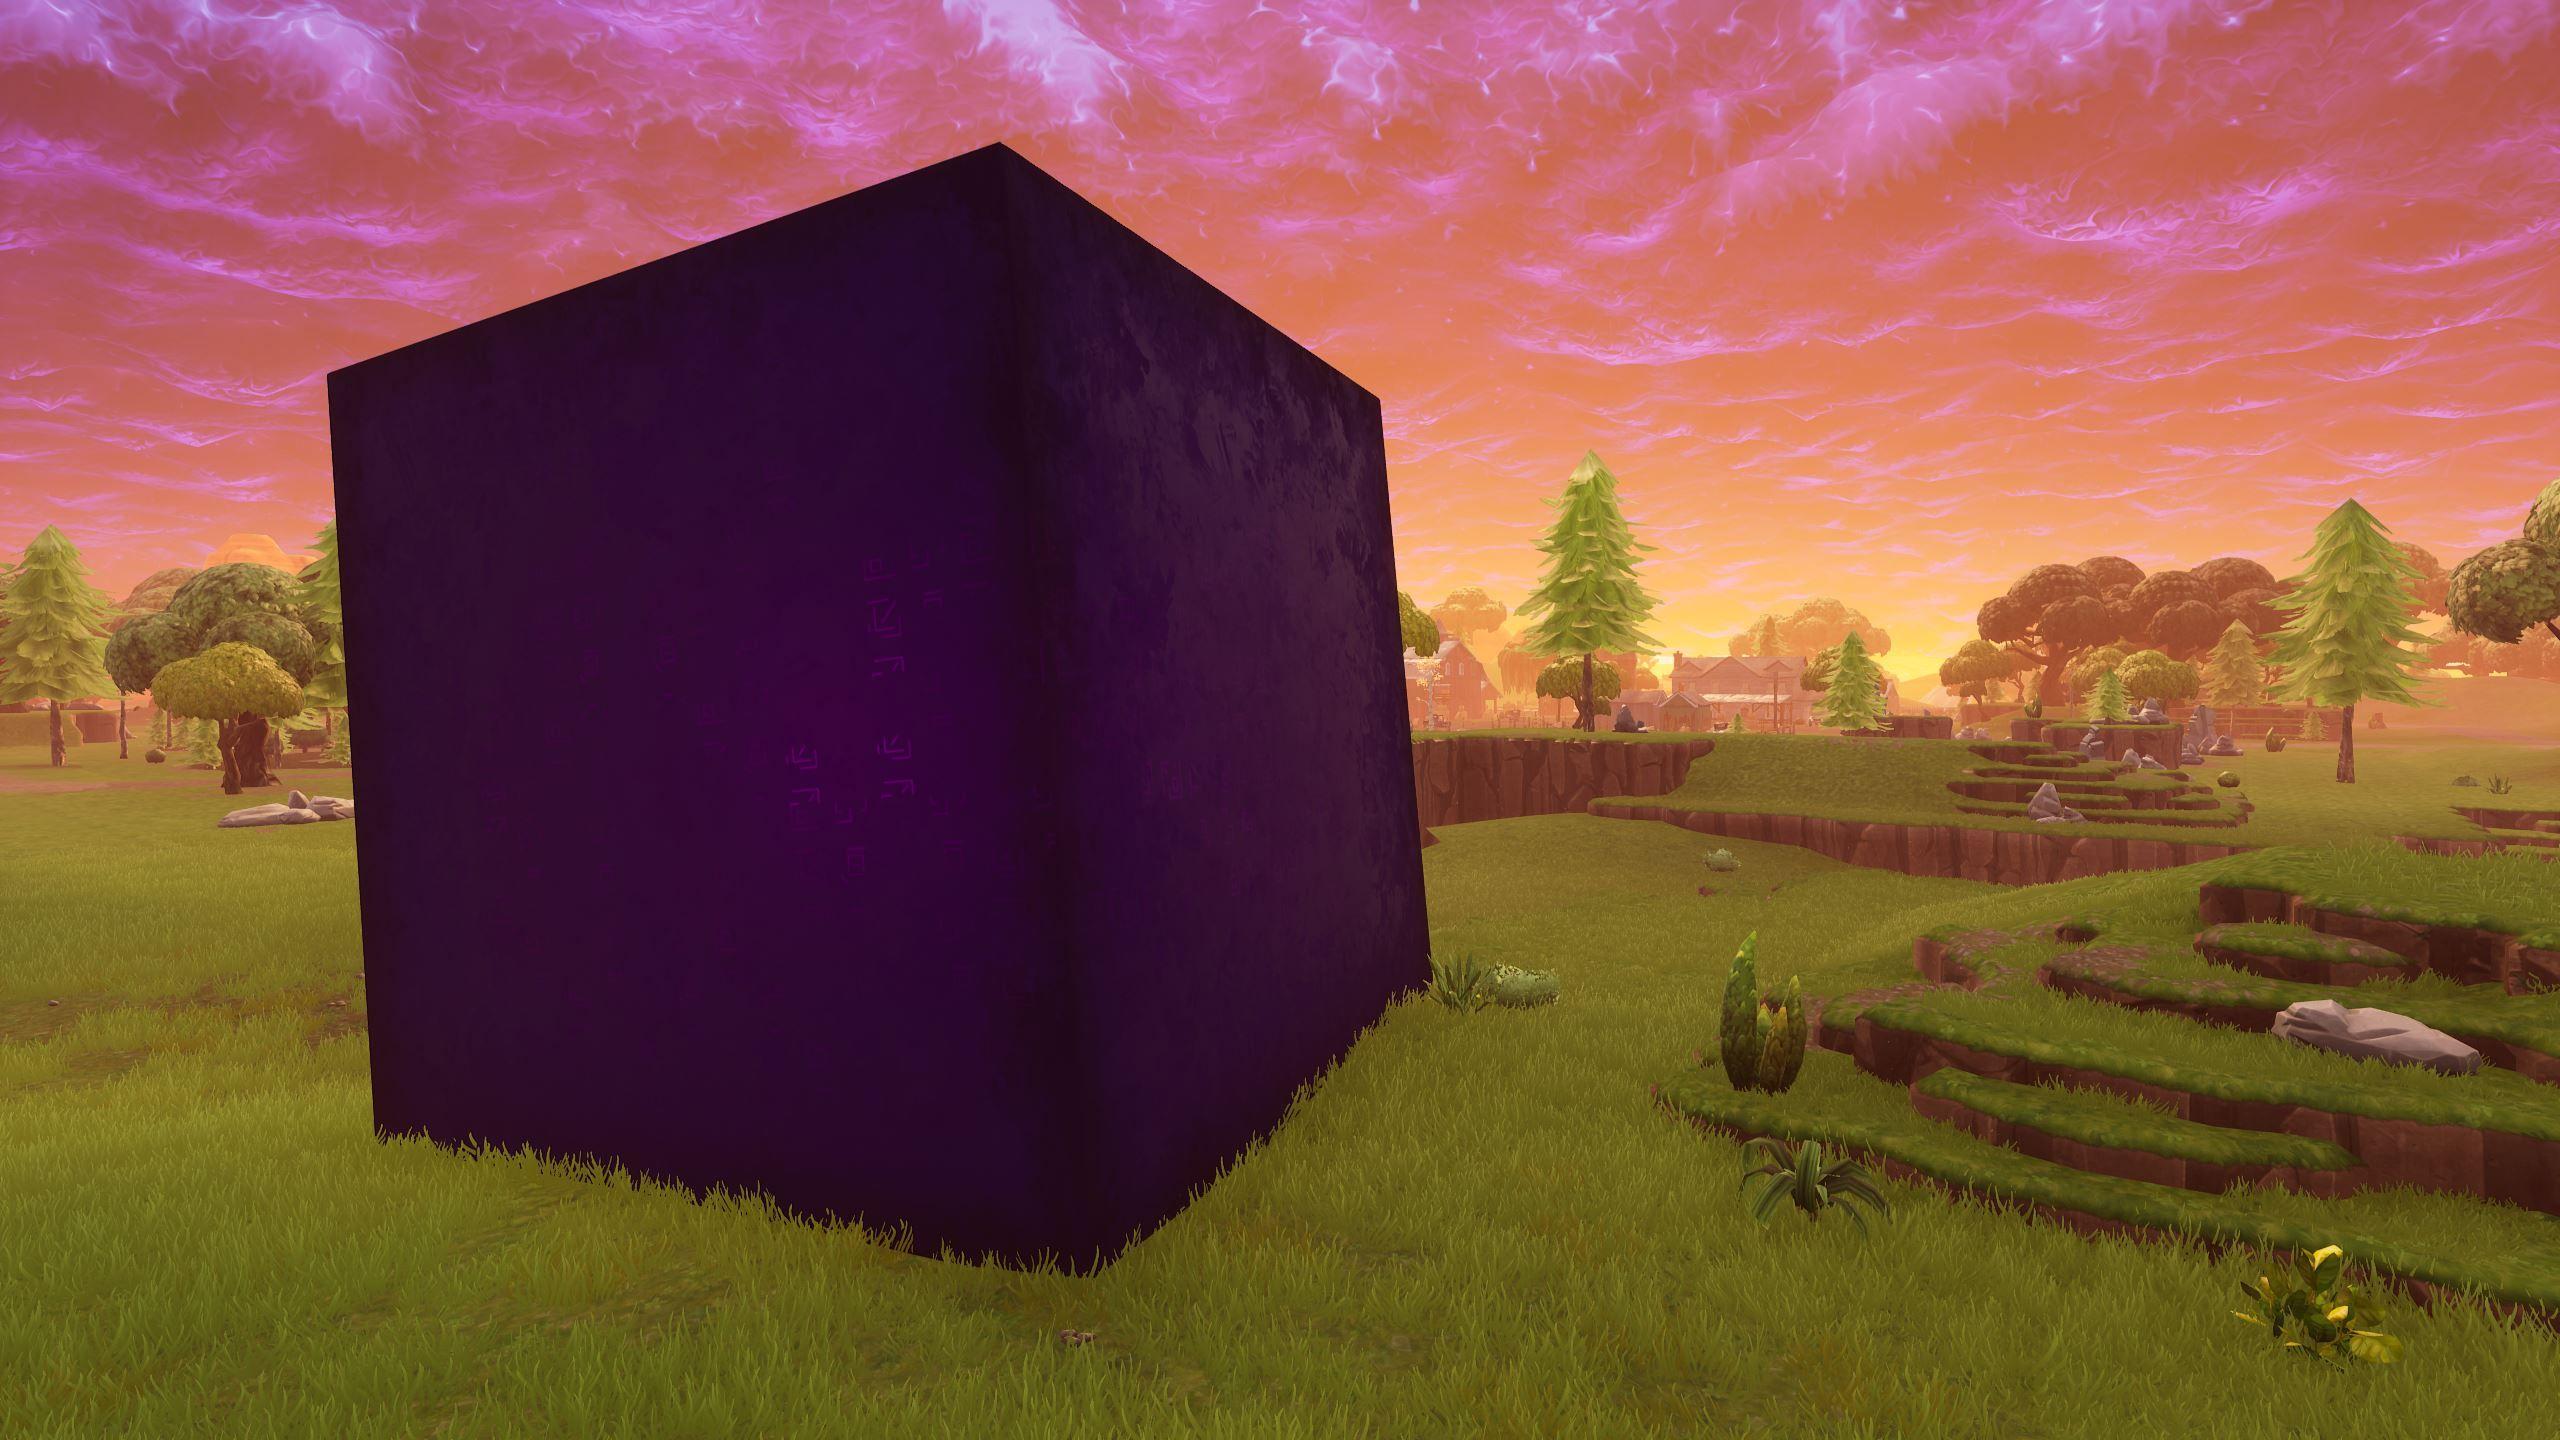 What's in Fortnite's mysterious purple cube?